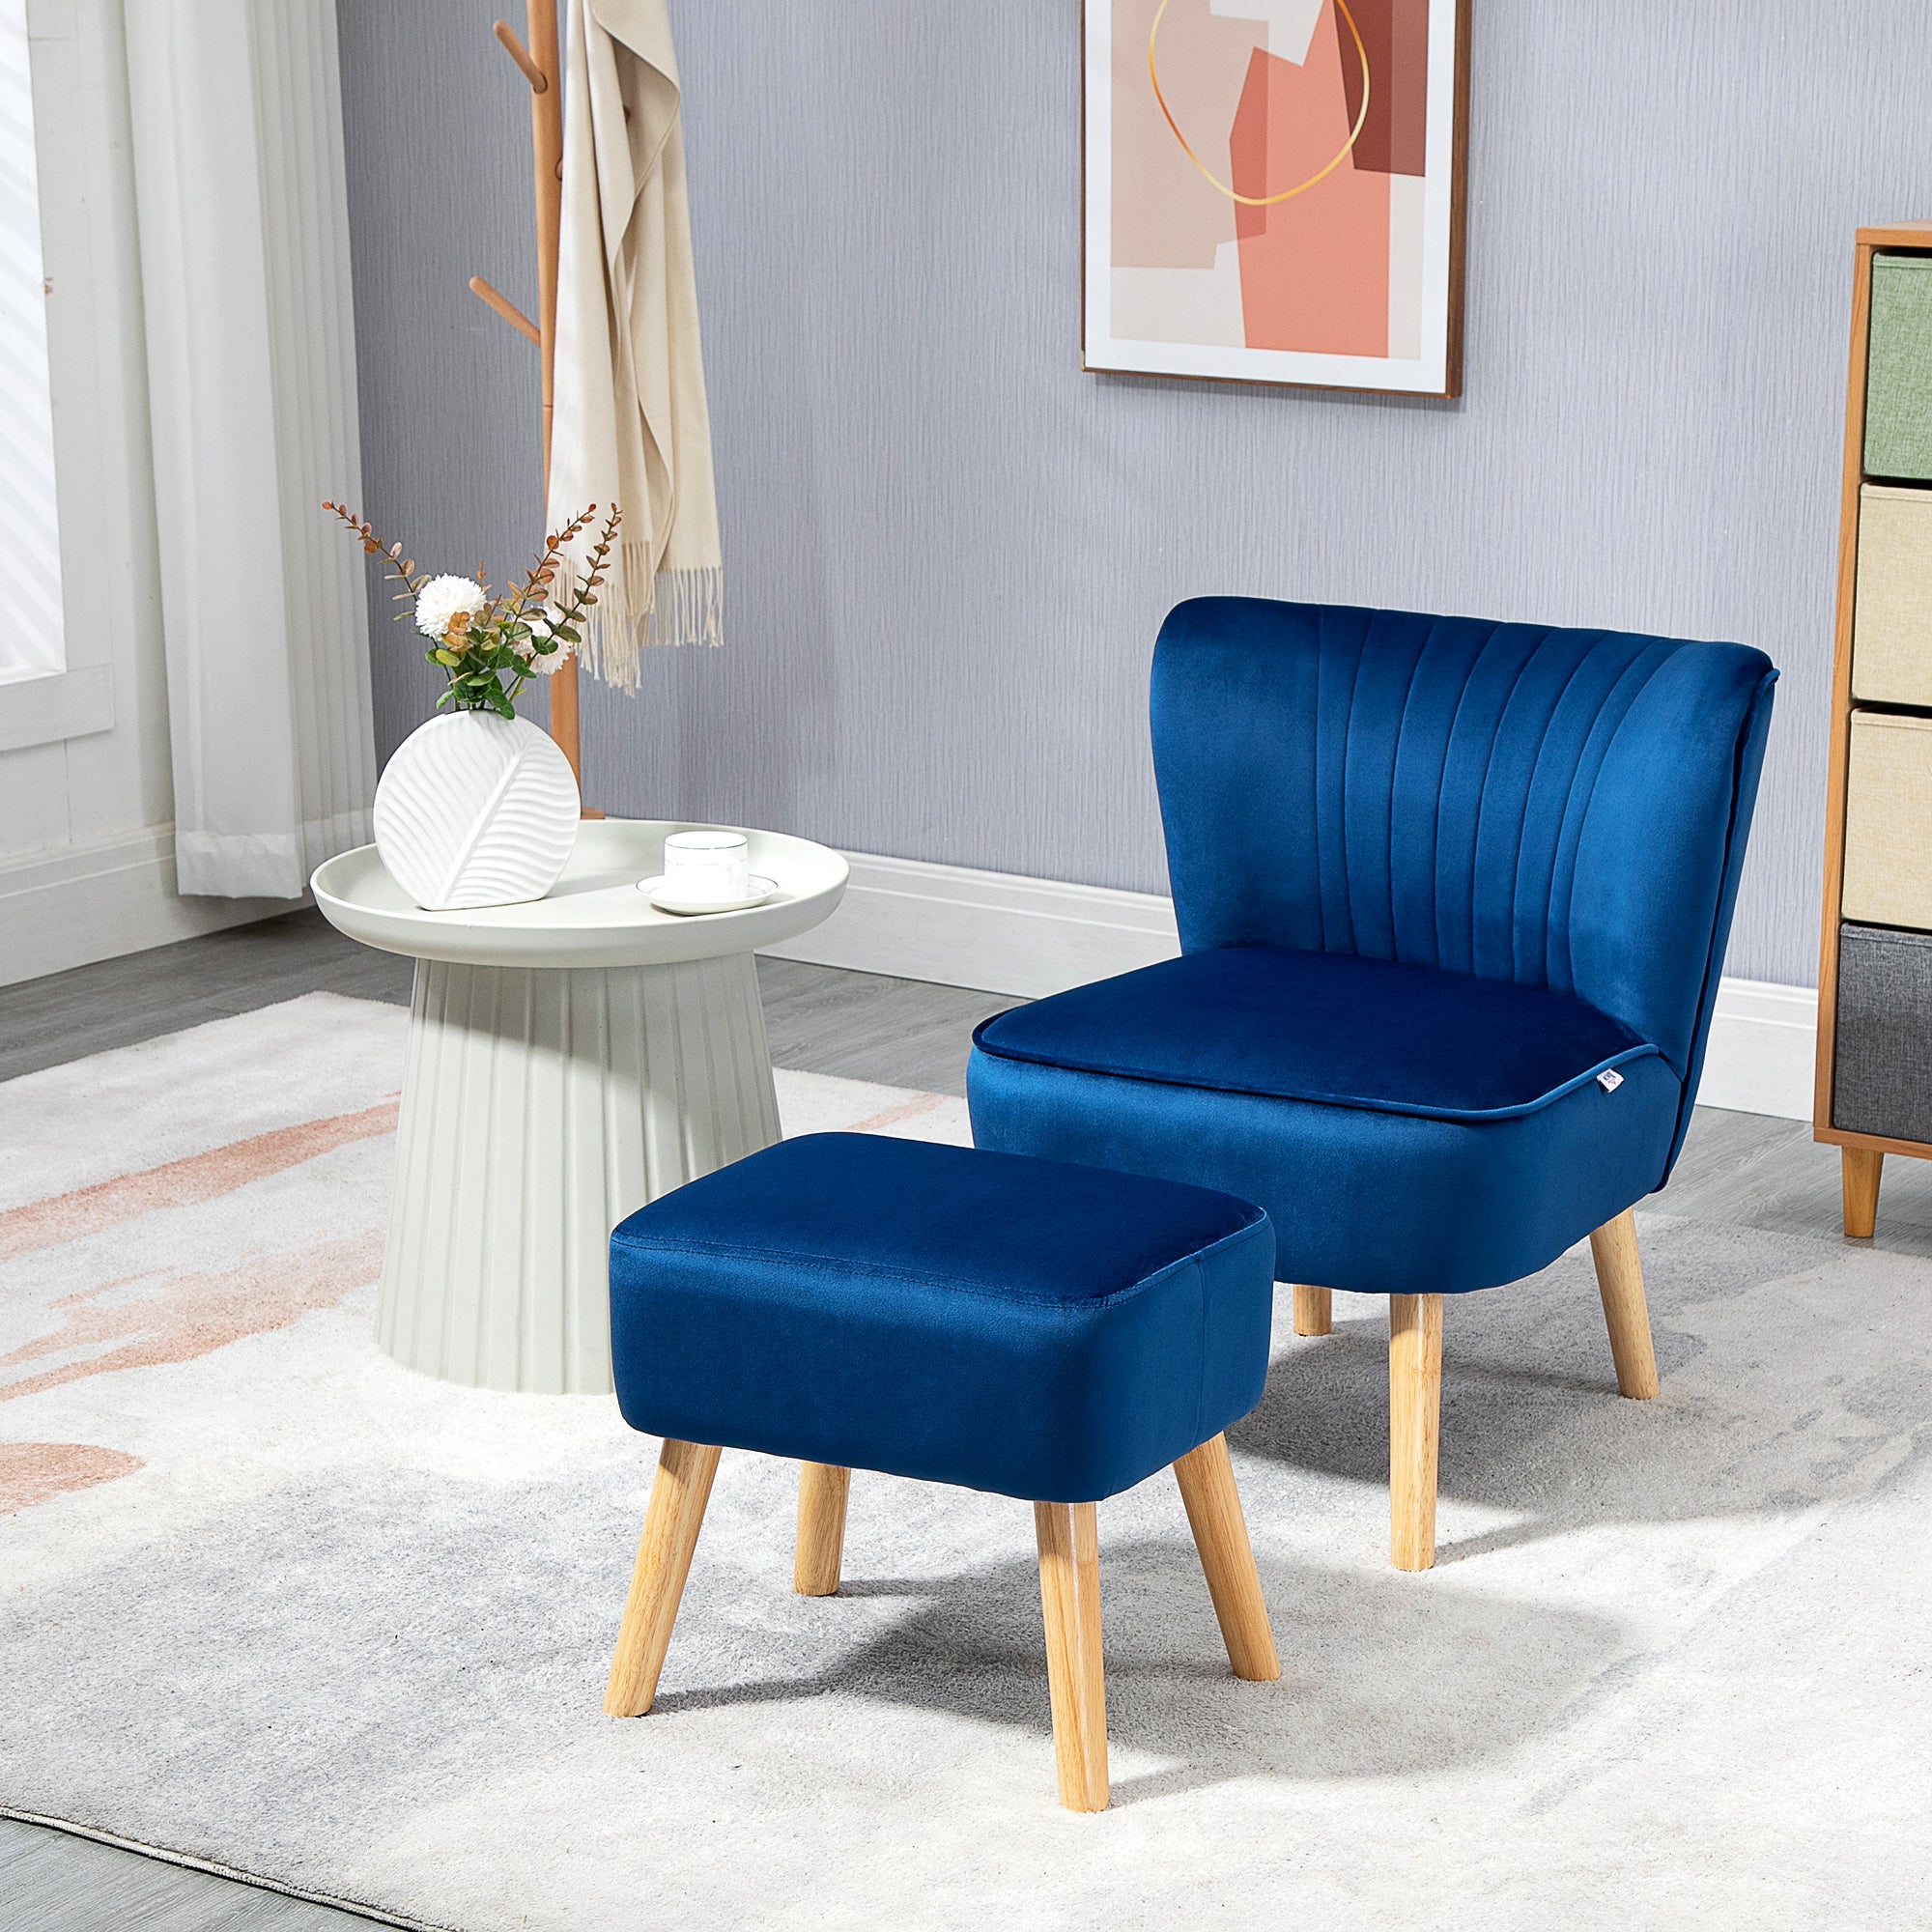 Velvet Accent Chair Occasional Tub Seat Padding Curved Back w/ Ottoman Wood Frame Legs Home Furniture, Dark Blue-1